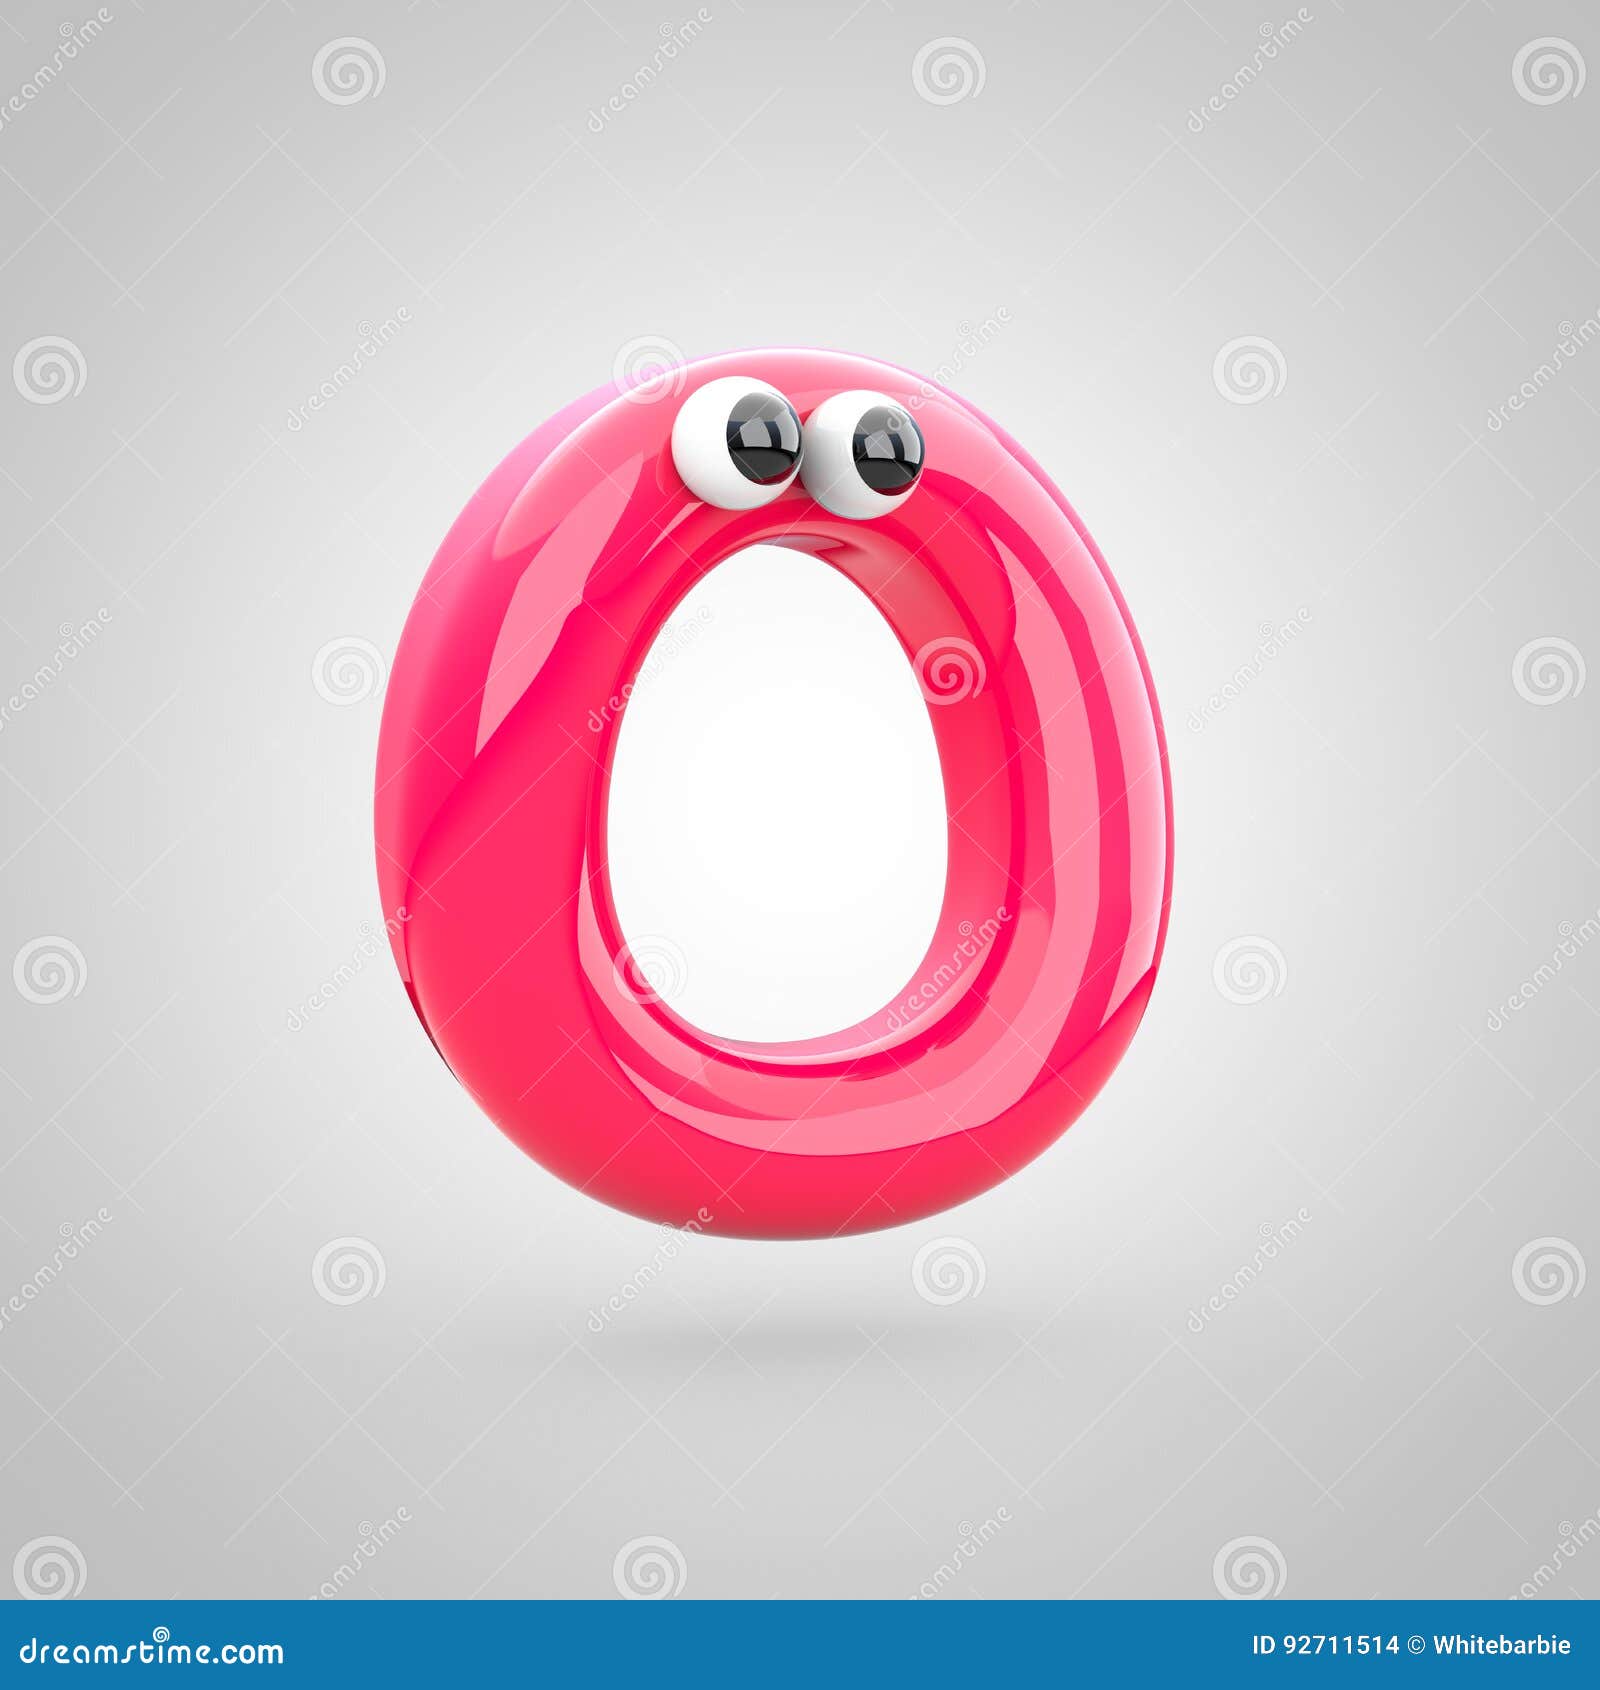 Funny Pink Letter O Uppercase With Eyes Stock Illustration